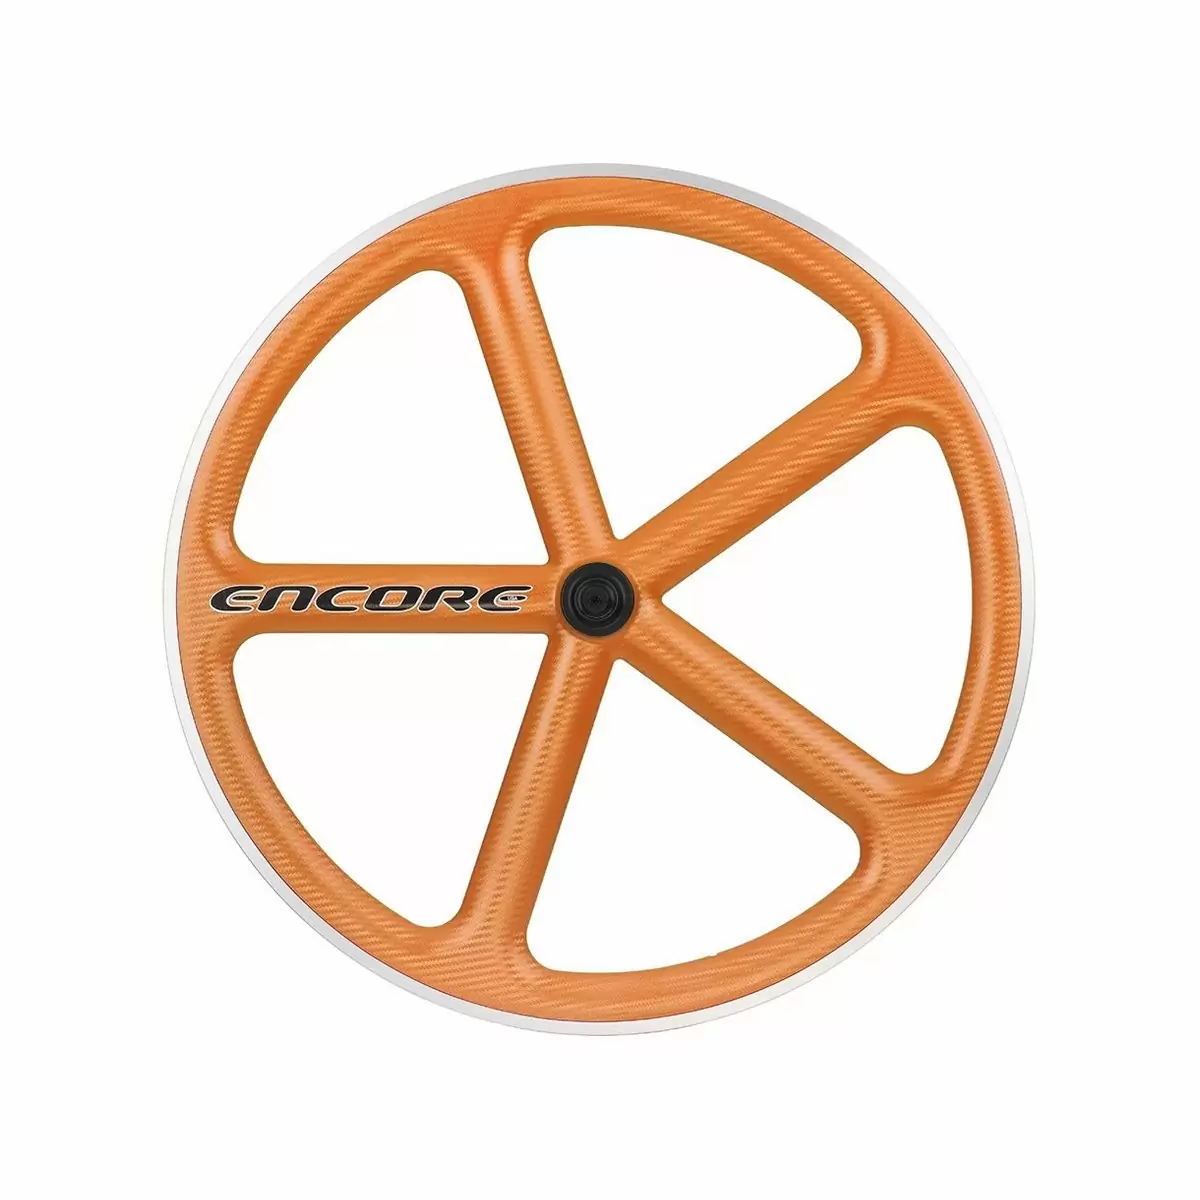 roue arrière 700c track 5 rayons carbone tissage orange msw - image